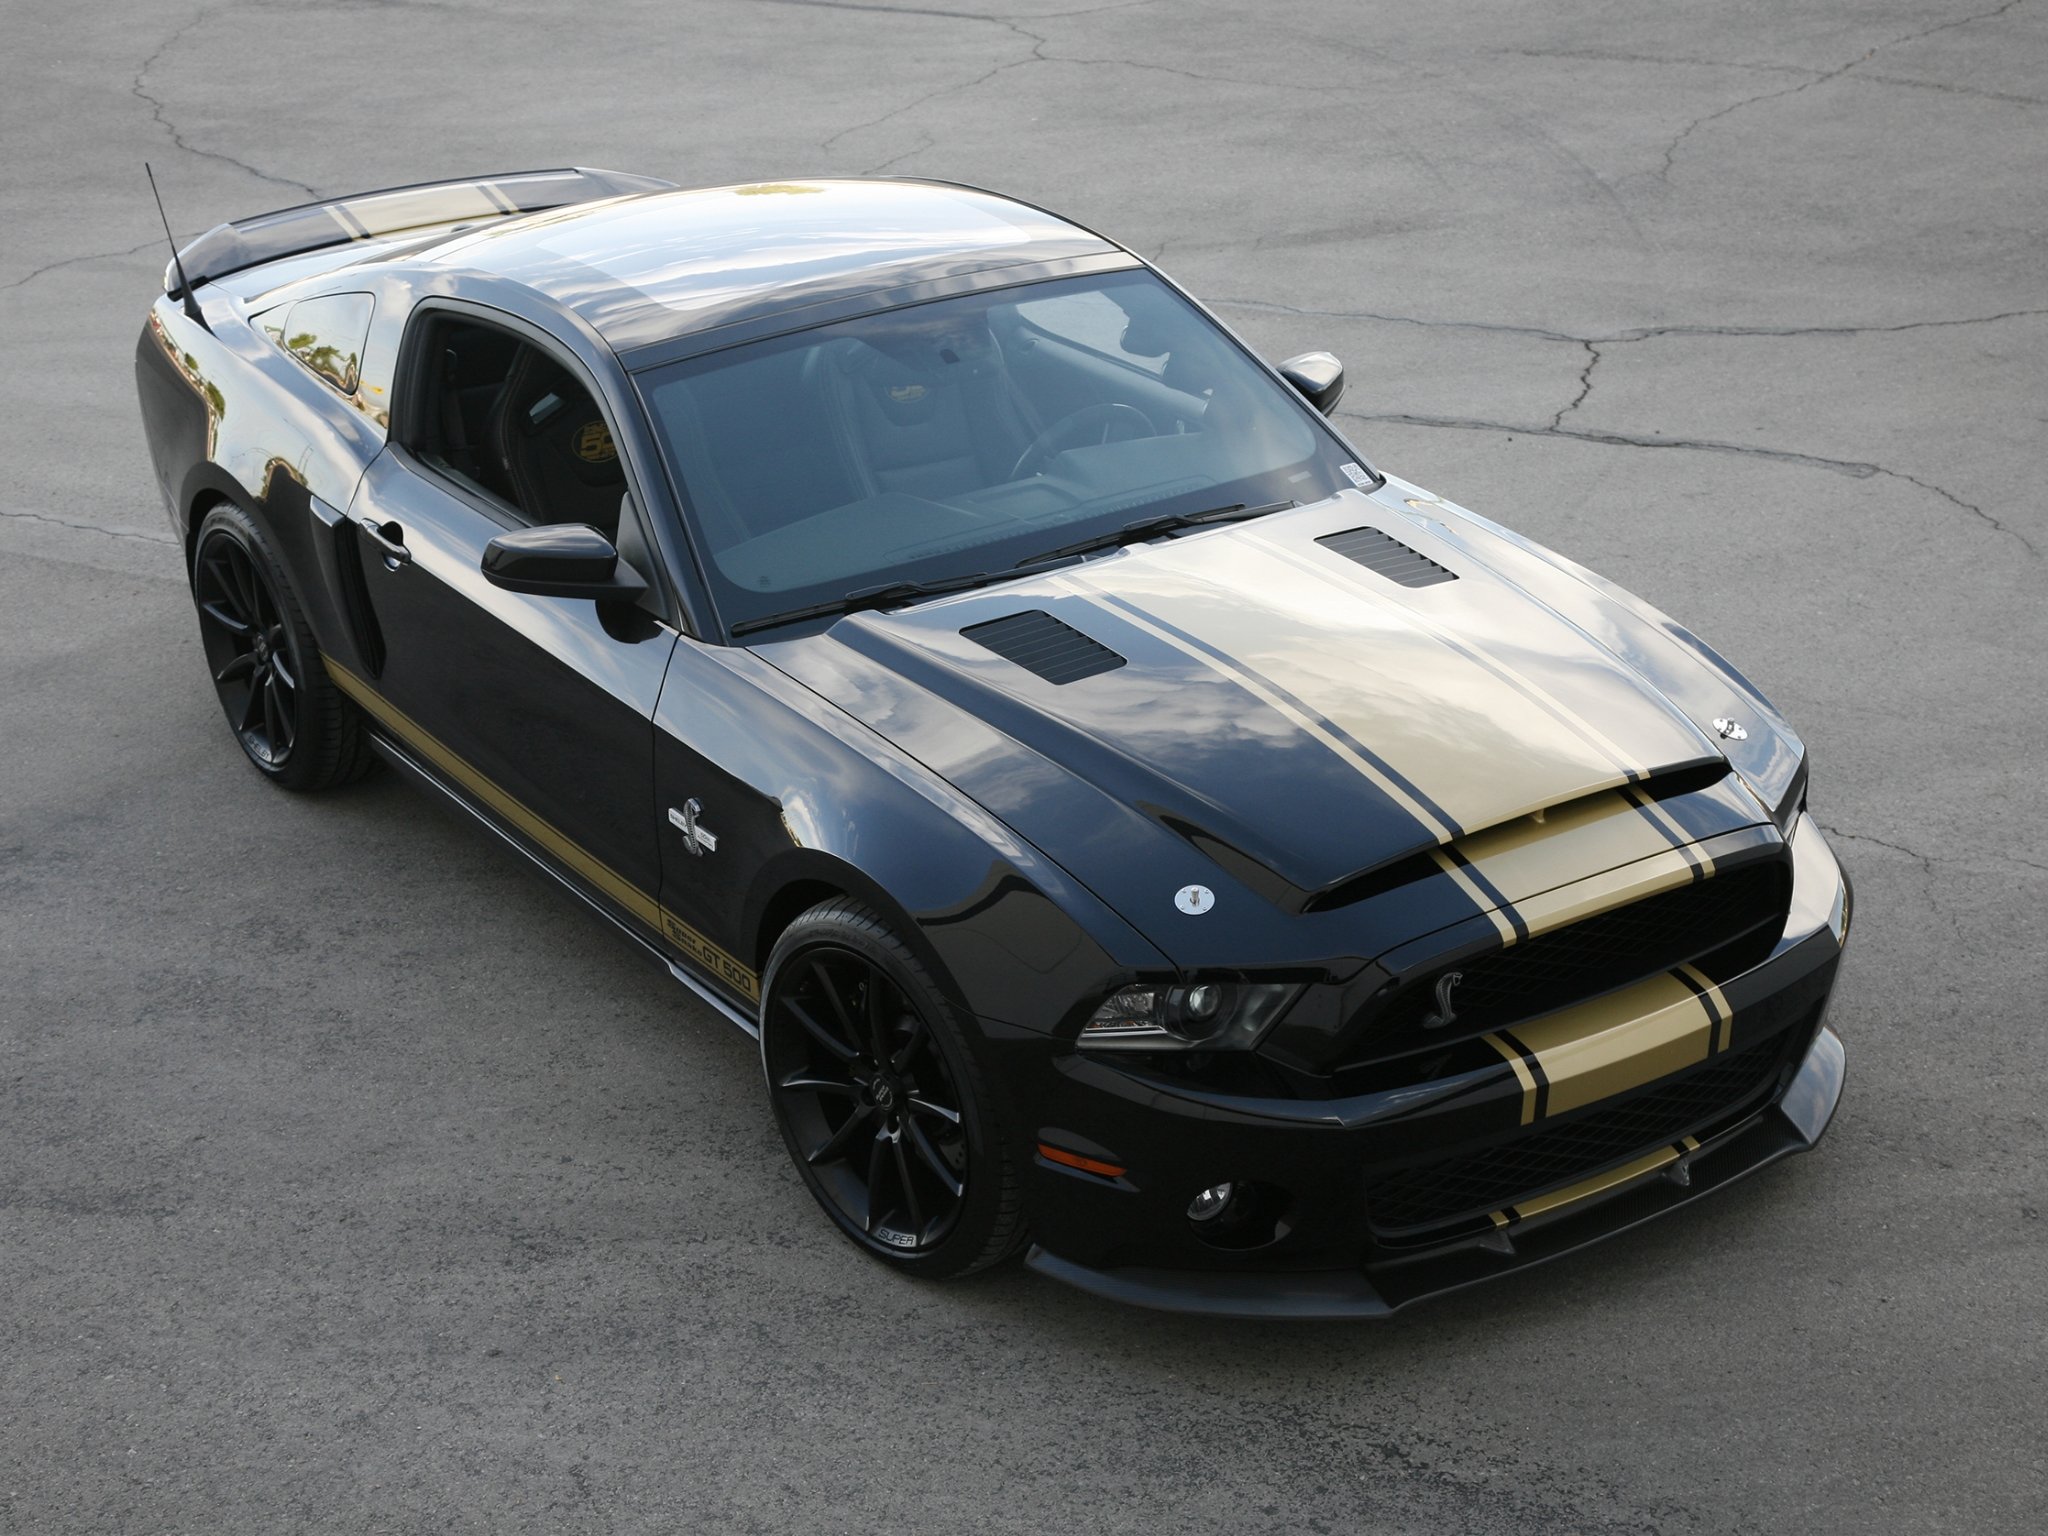 2012, Shelby, Gt500, Super, Snake, Ford, Mustang, Muscle Wallpaper